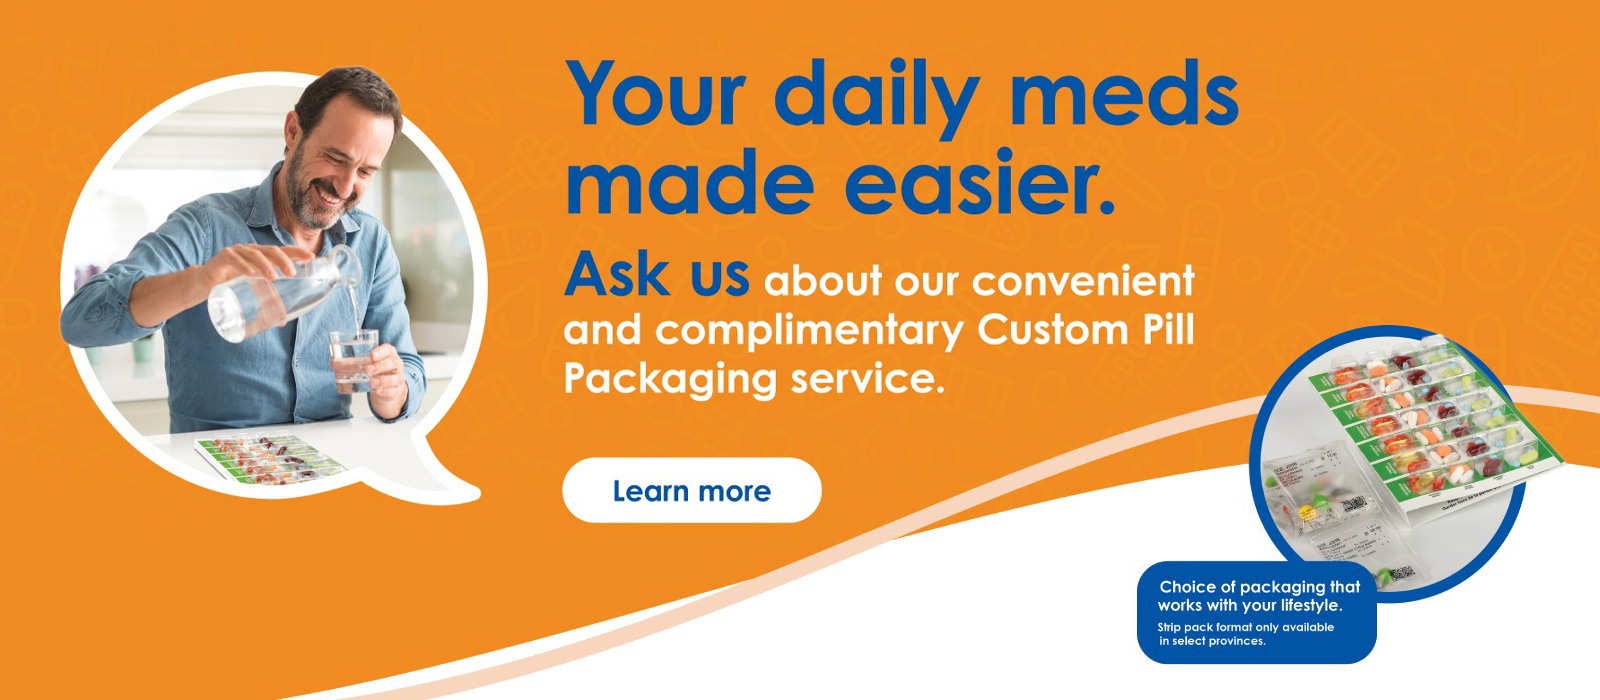 Text Reading 'To make your daily meds easier choose our Custom pill packaging service at Lawtons. Click on 'Learn more' button for more information.'